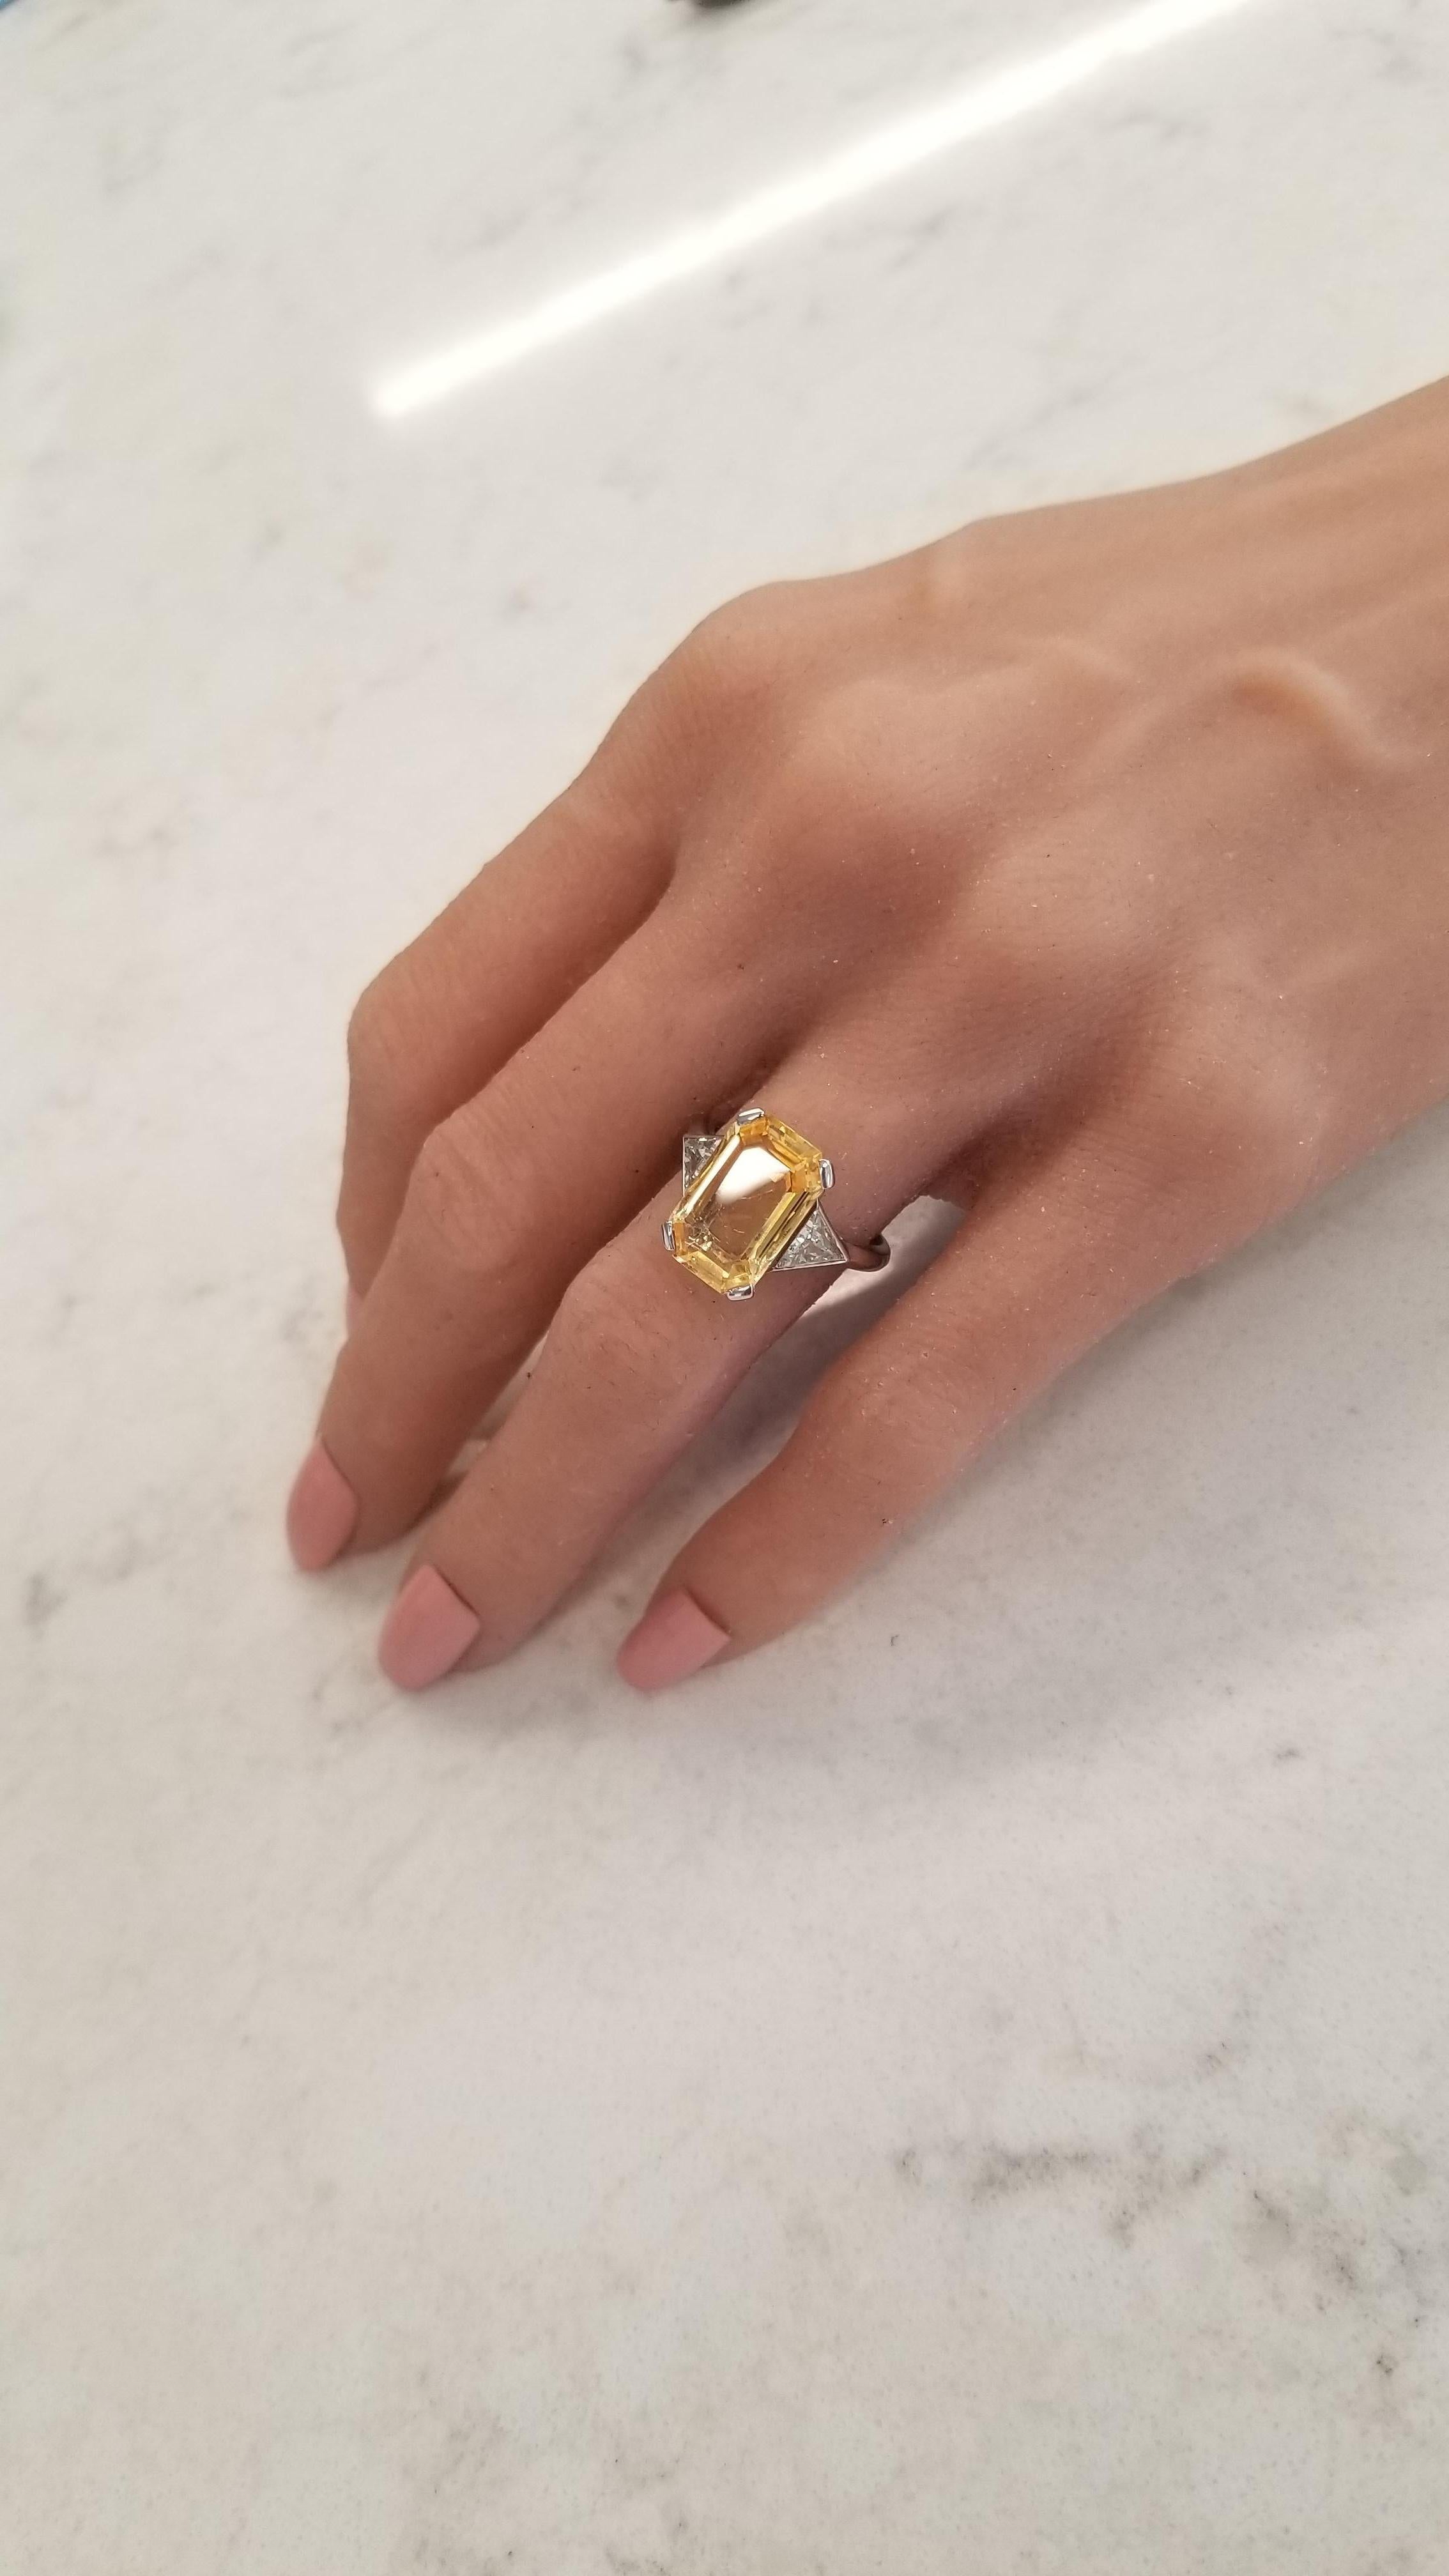 This is the classic 3-stone luxury ring. Featured is a 5.20 carat, prong set, emerald cut yellow sapphire with measurements of 14.50x9.20MM. This yellow sapphire is unheated making it extremely scarce. Its origin is Sri Lanka; its color is intense